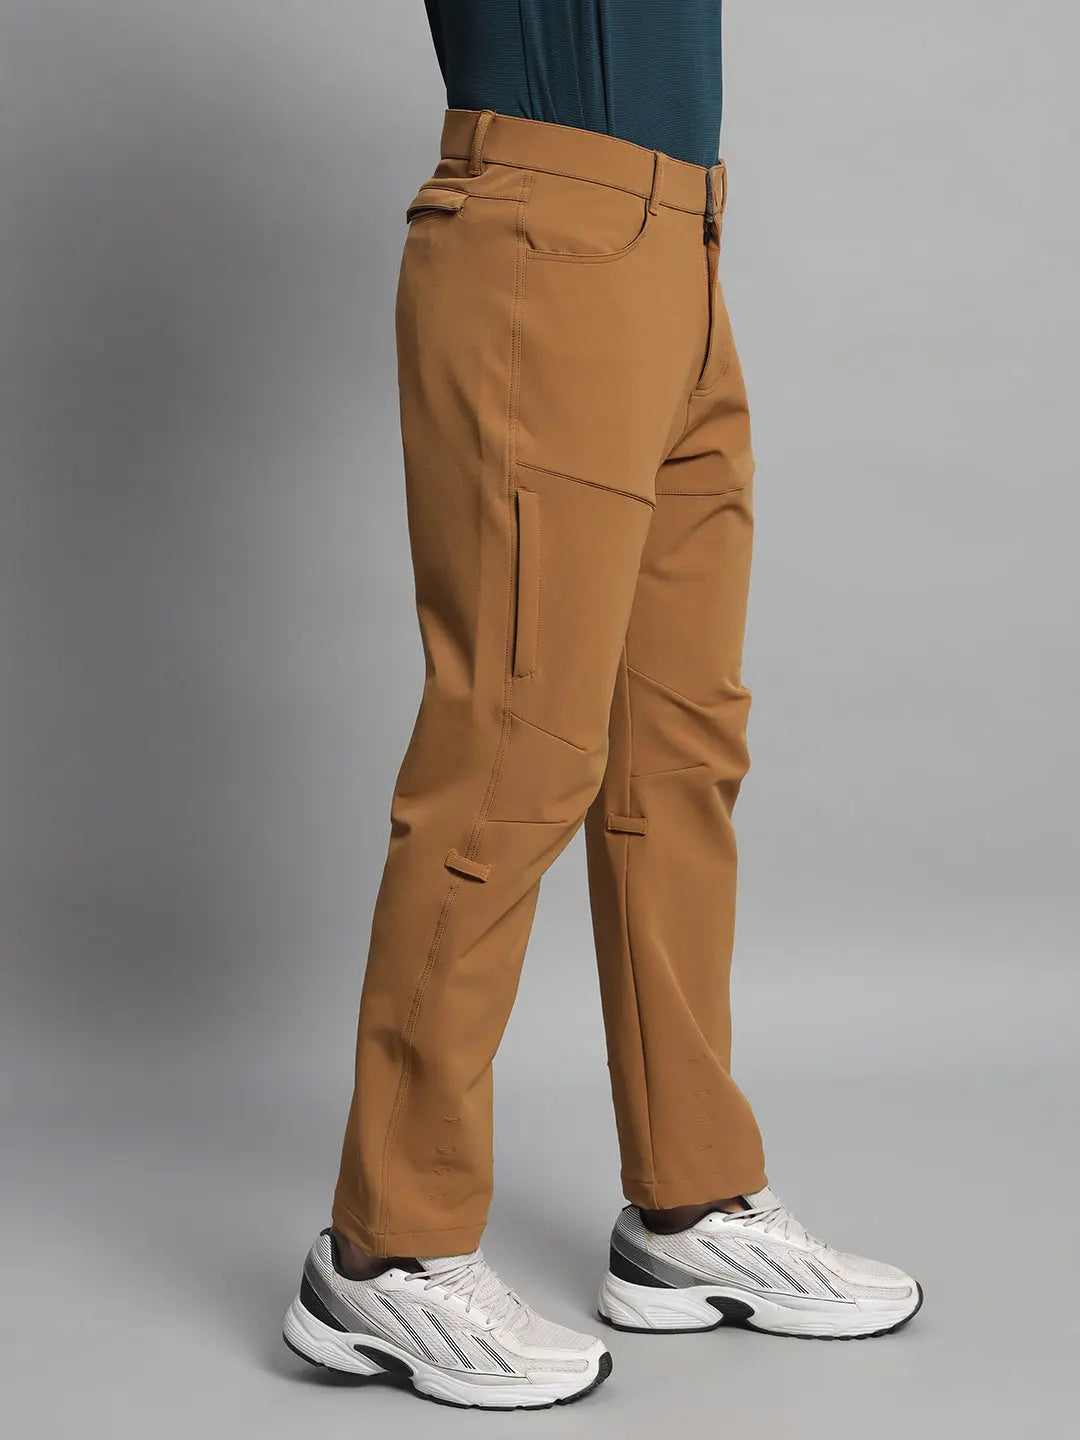 Men's Trouser Styles: How to Pair Pants Perfectly – LIFESTYLE BY PS